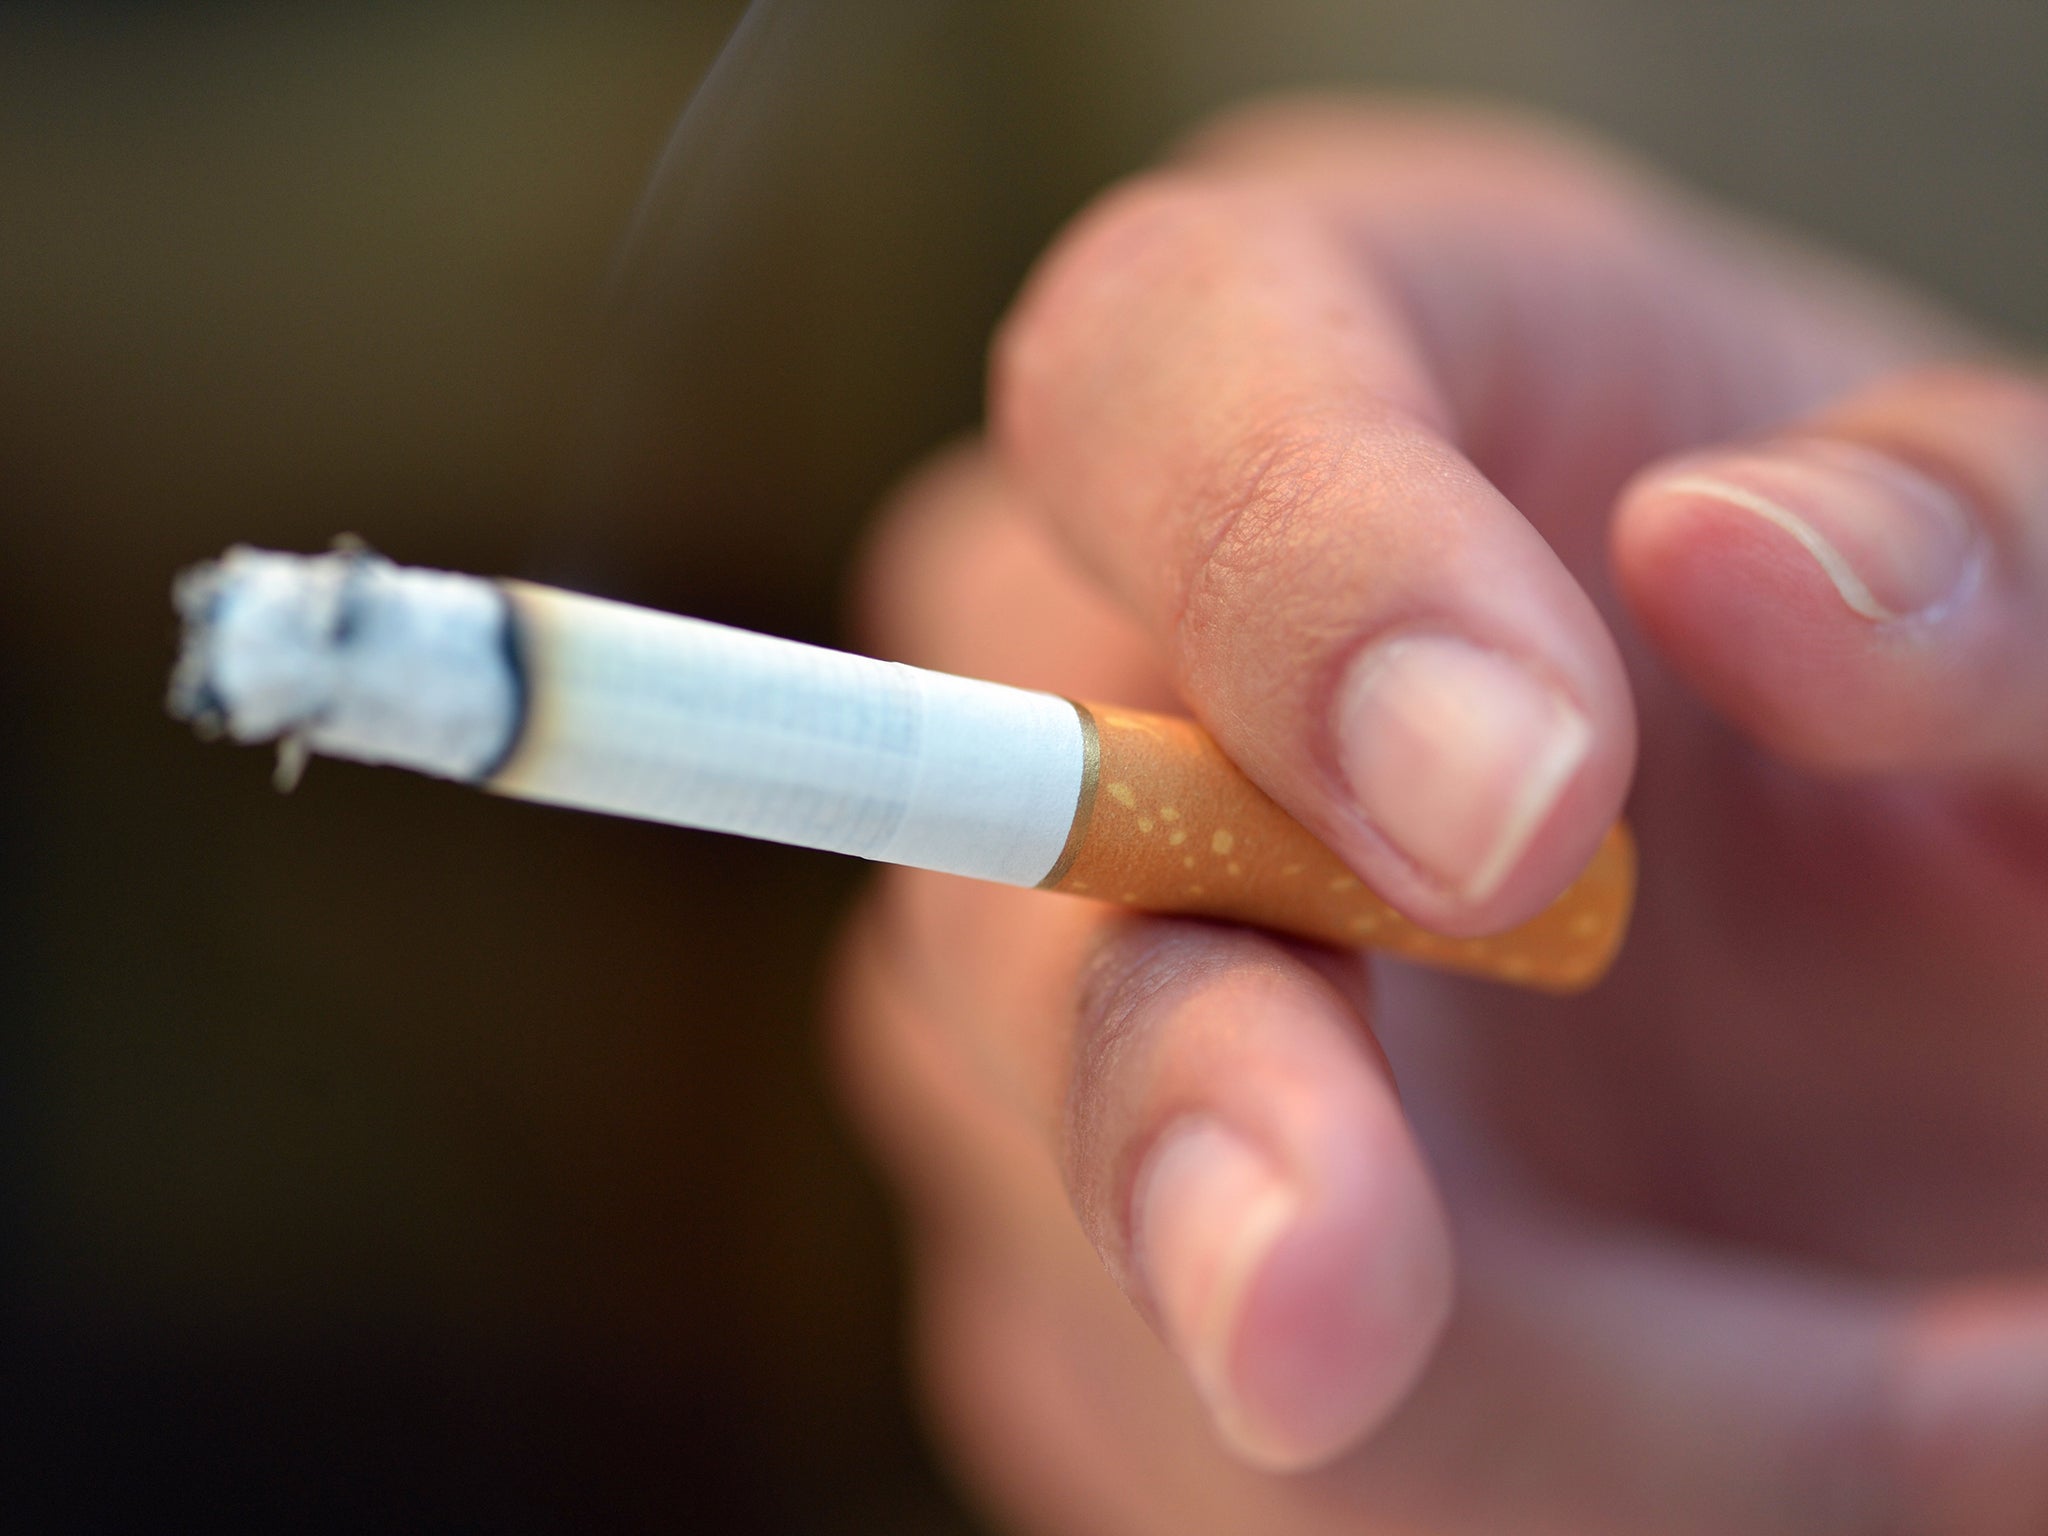 Stoptober: Everything you need to know about the annual 28-day challenge to stop smoking